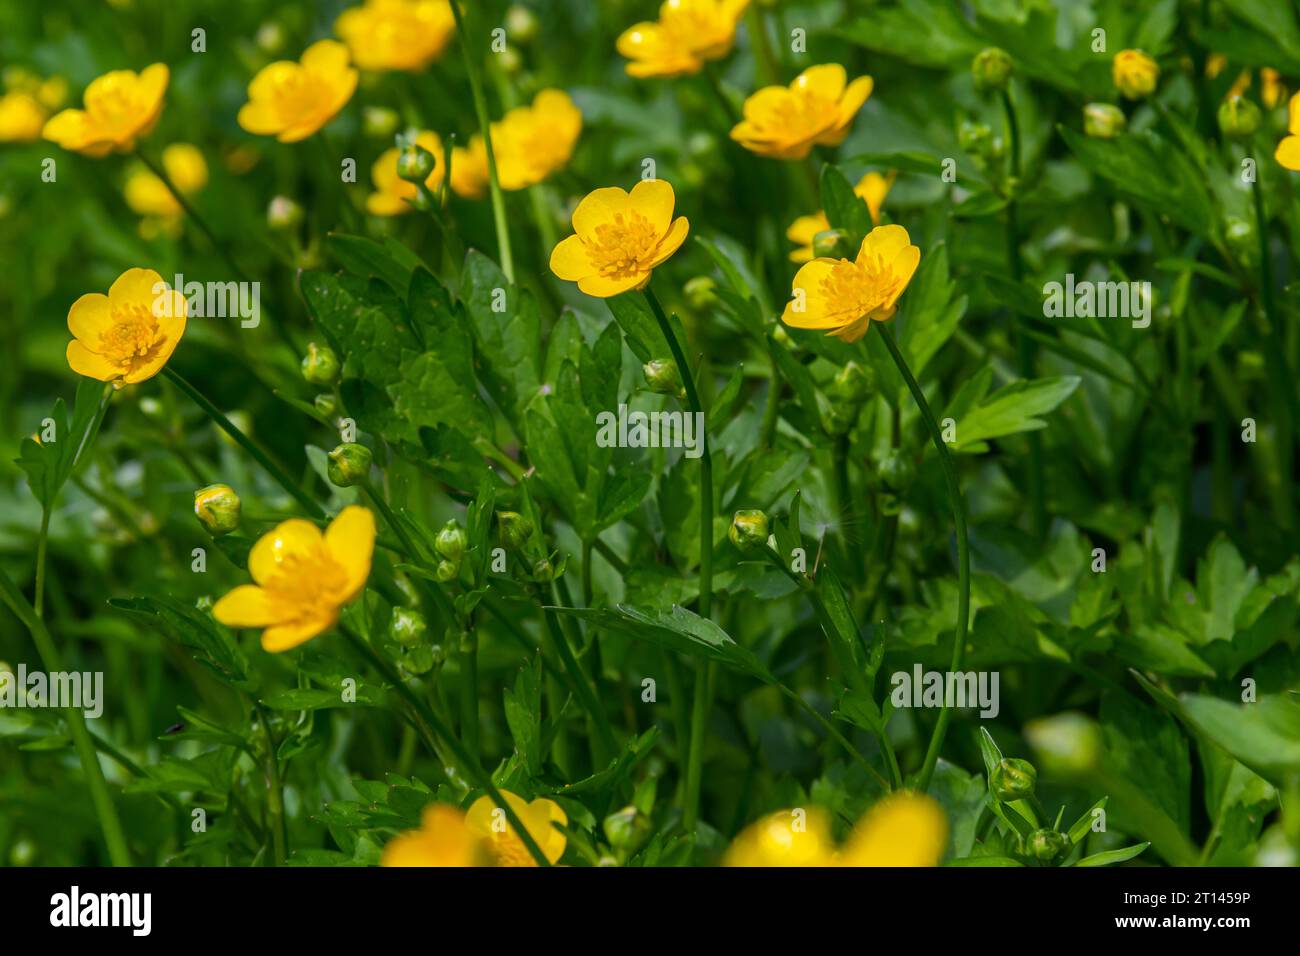 Close-up of Ranunculus repens, the creeping buttercup, is a flowering plant in the buttercup family Ranunculaceae, in the garden. Stock Photo